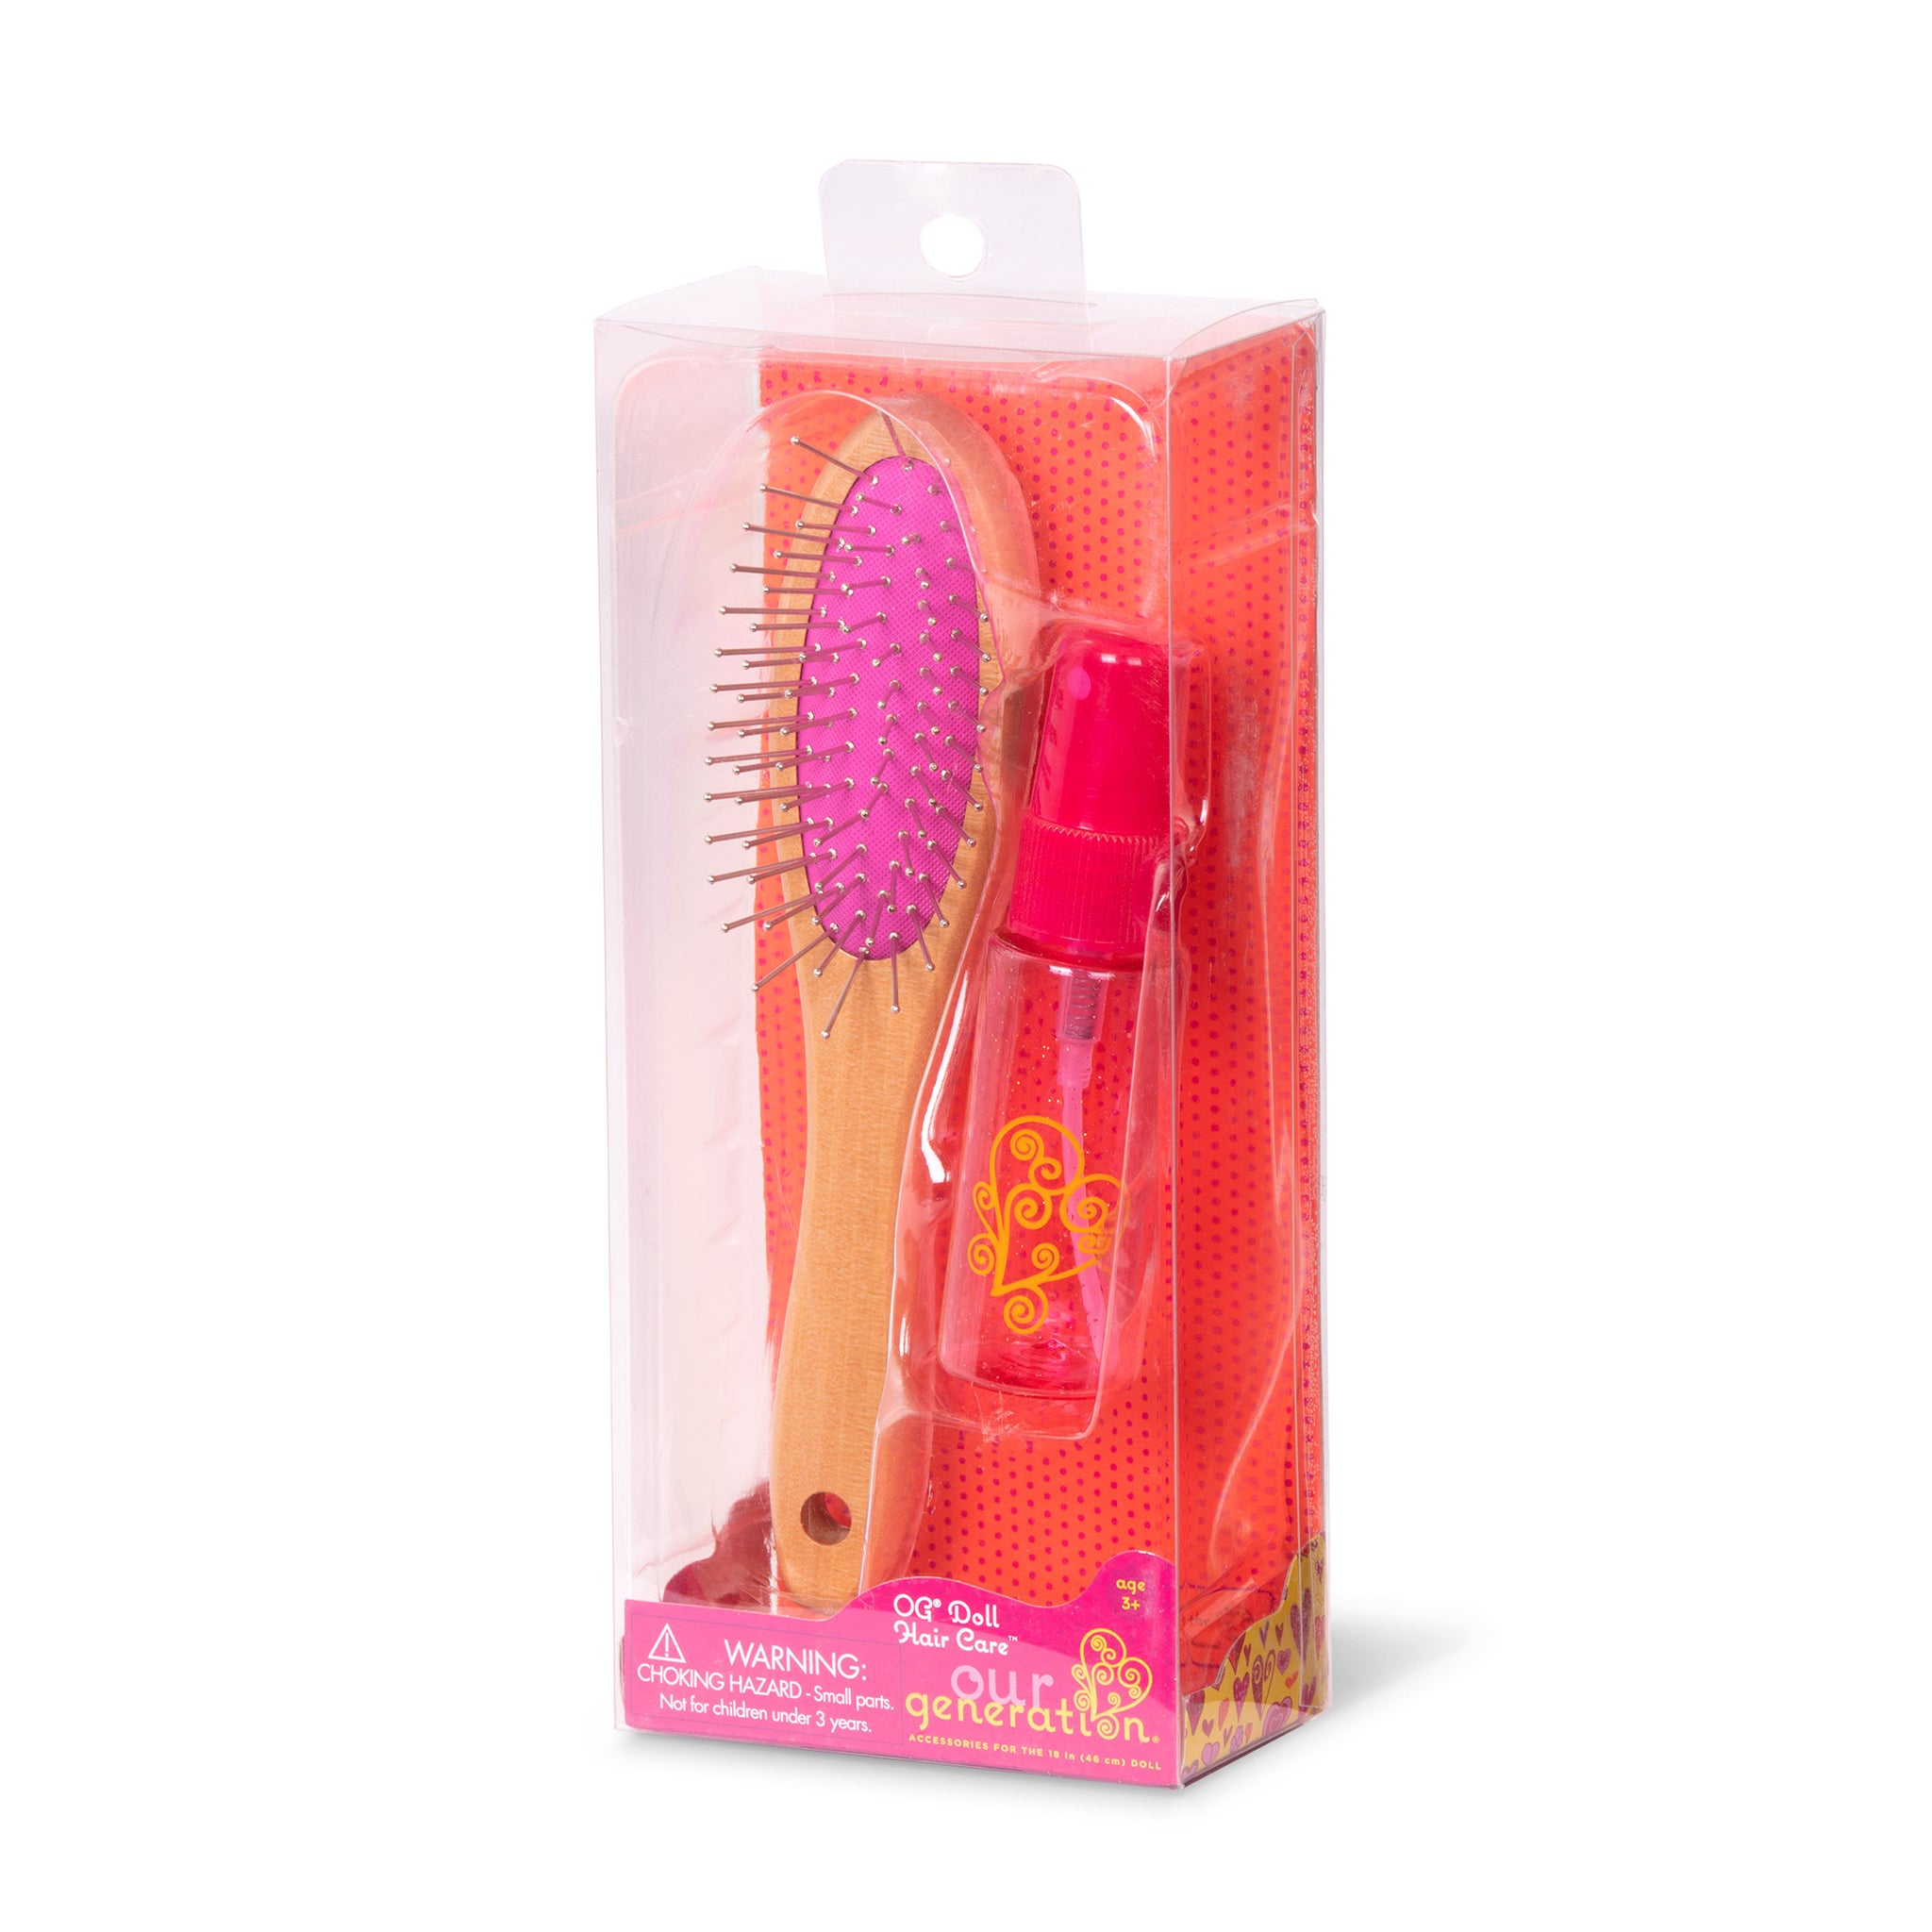 Our Generation Accessory - Hair Brush & Spray Bottle Set is an amazing doll accessory for creative play for young girls The Toy Wagon